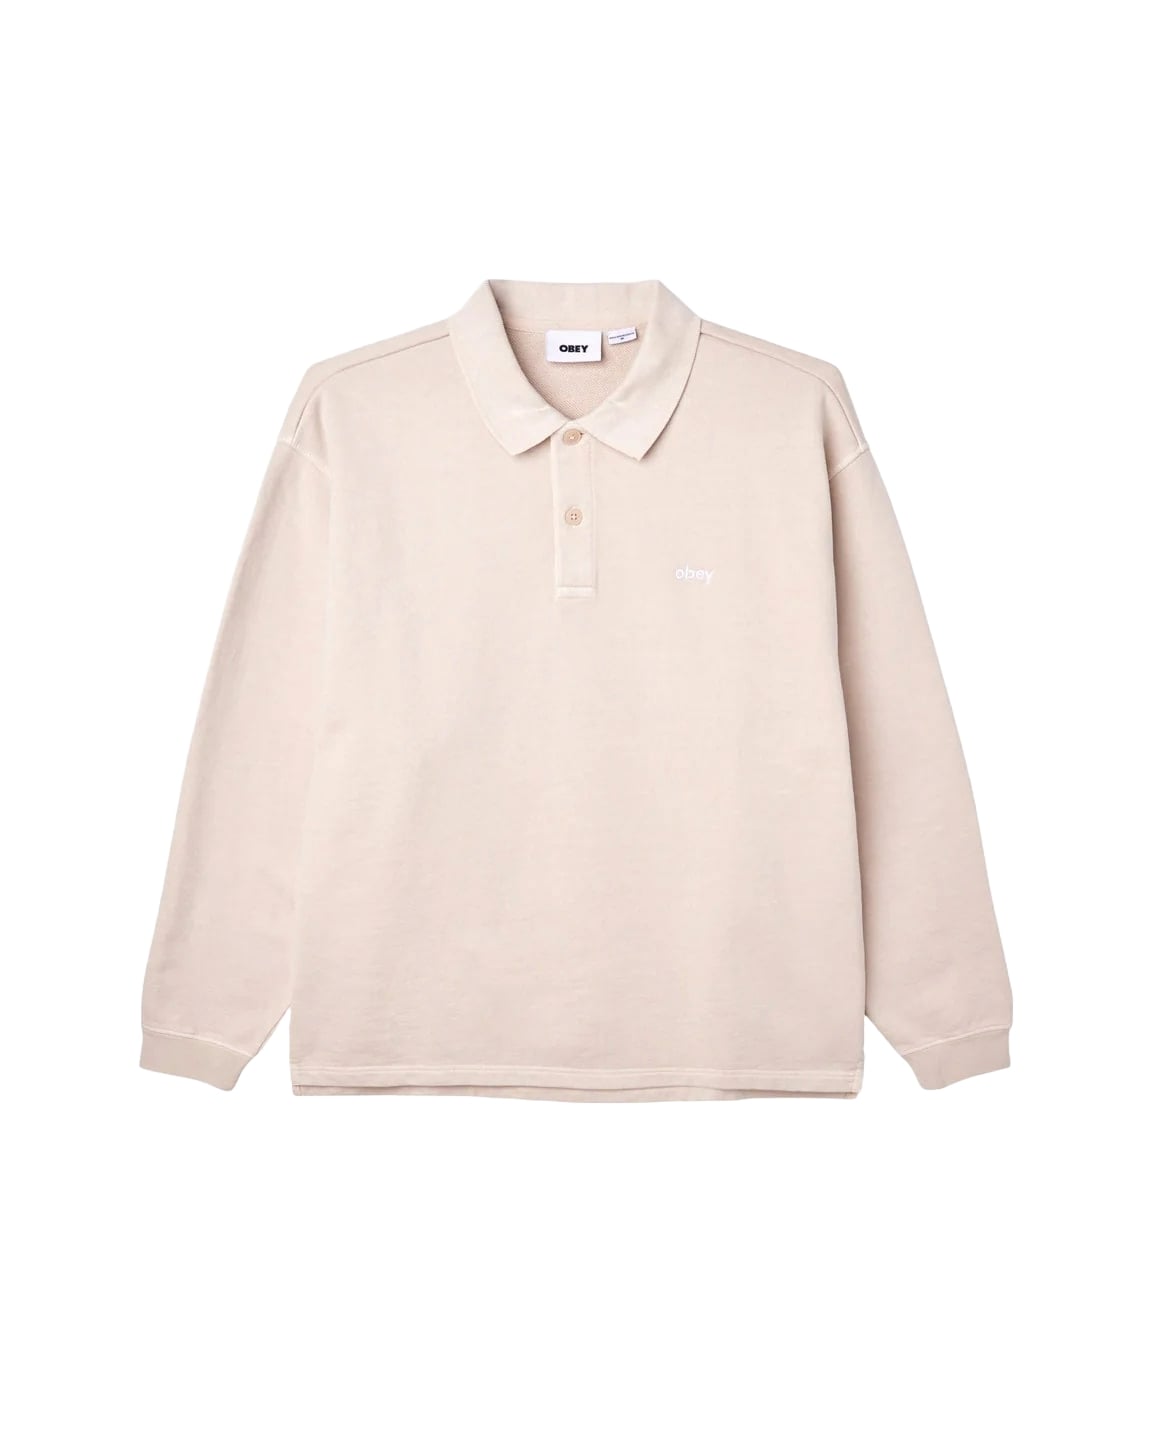 Obey Polo Men's Lowercase Pigment Pink